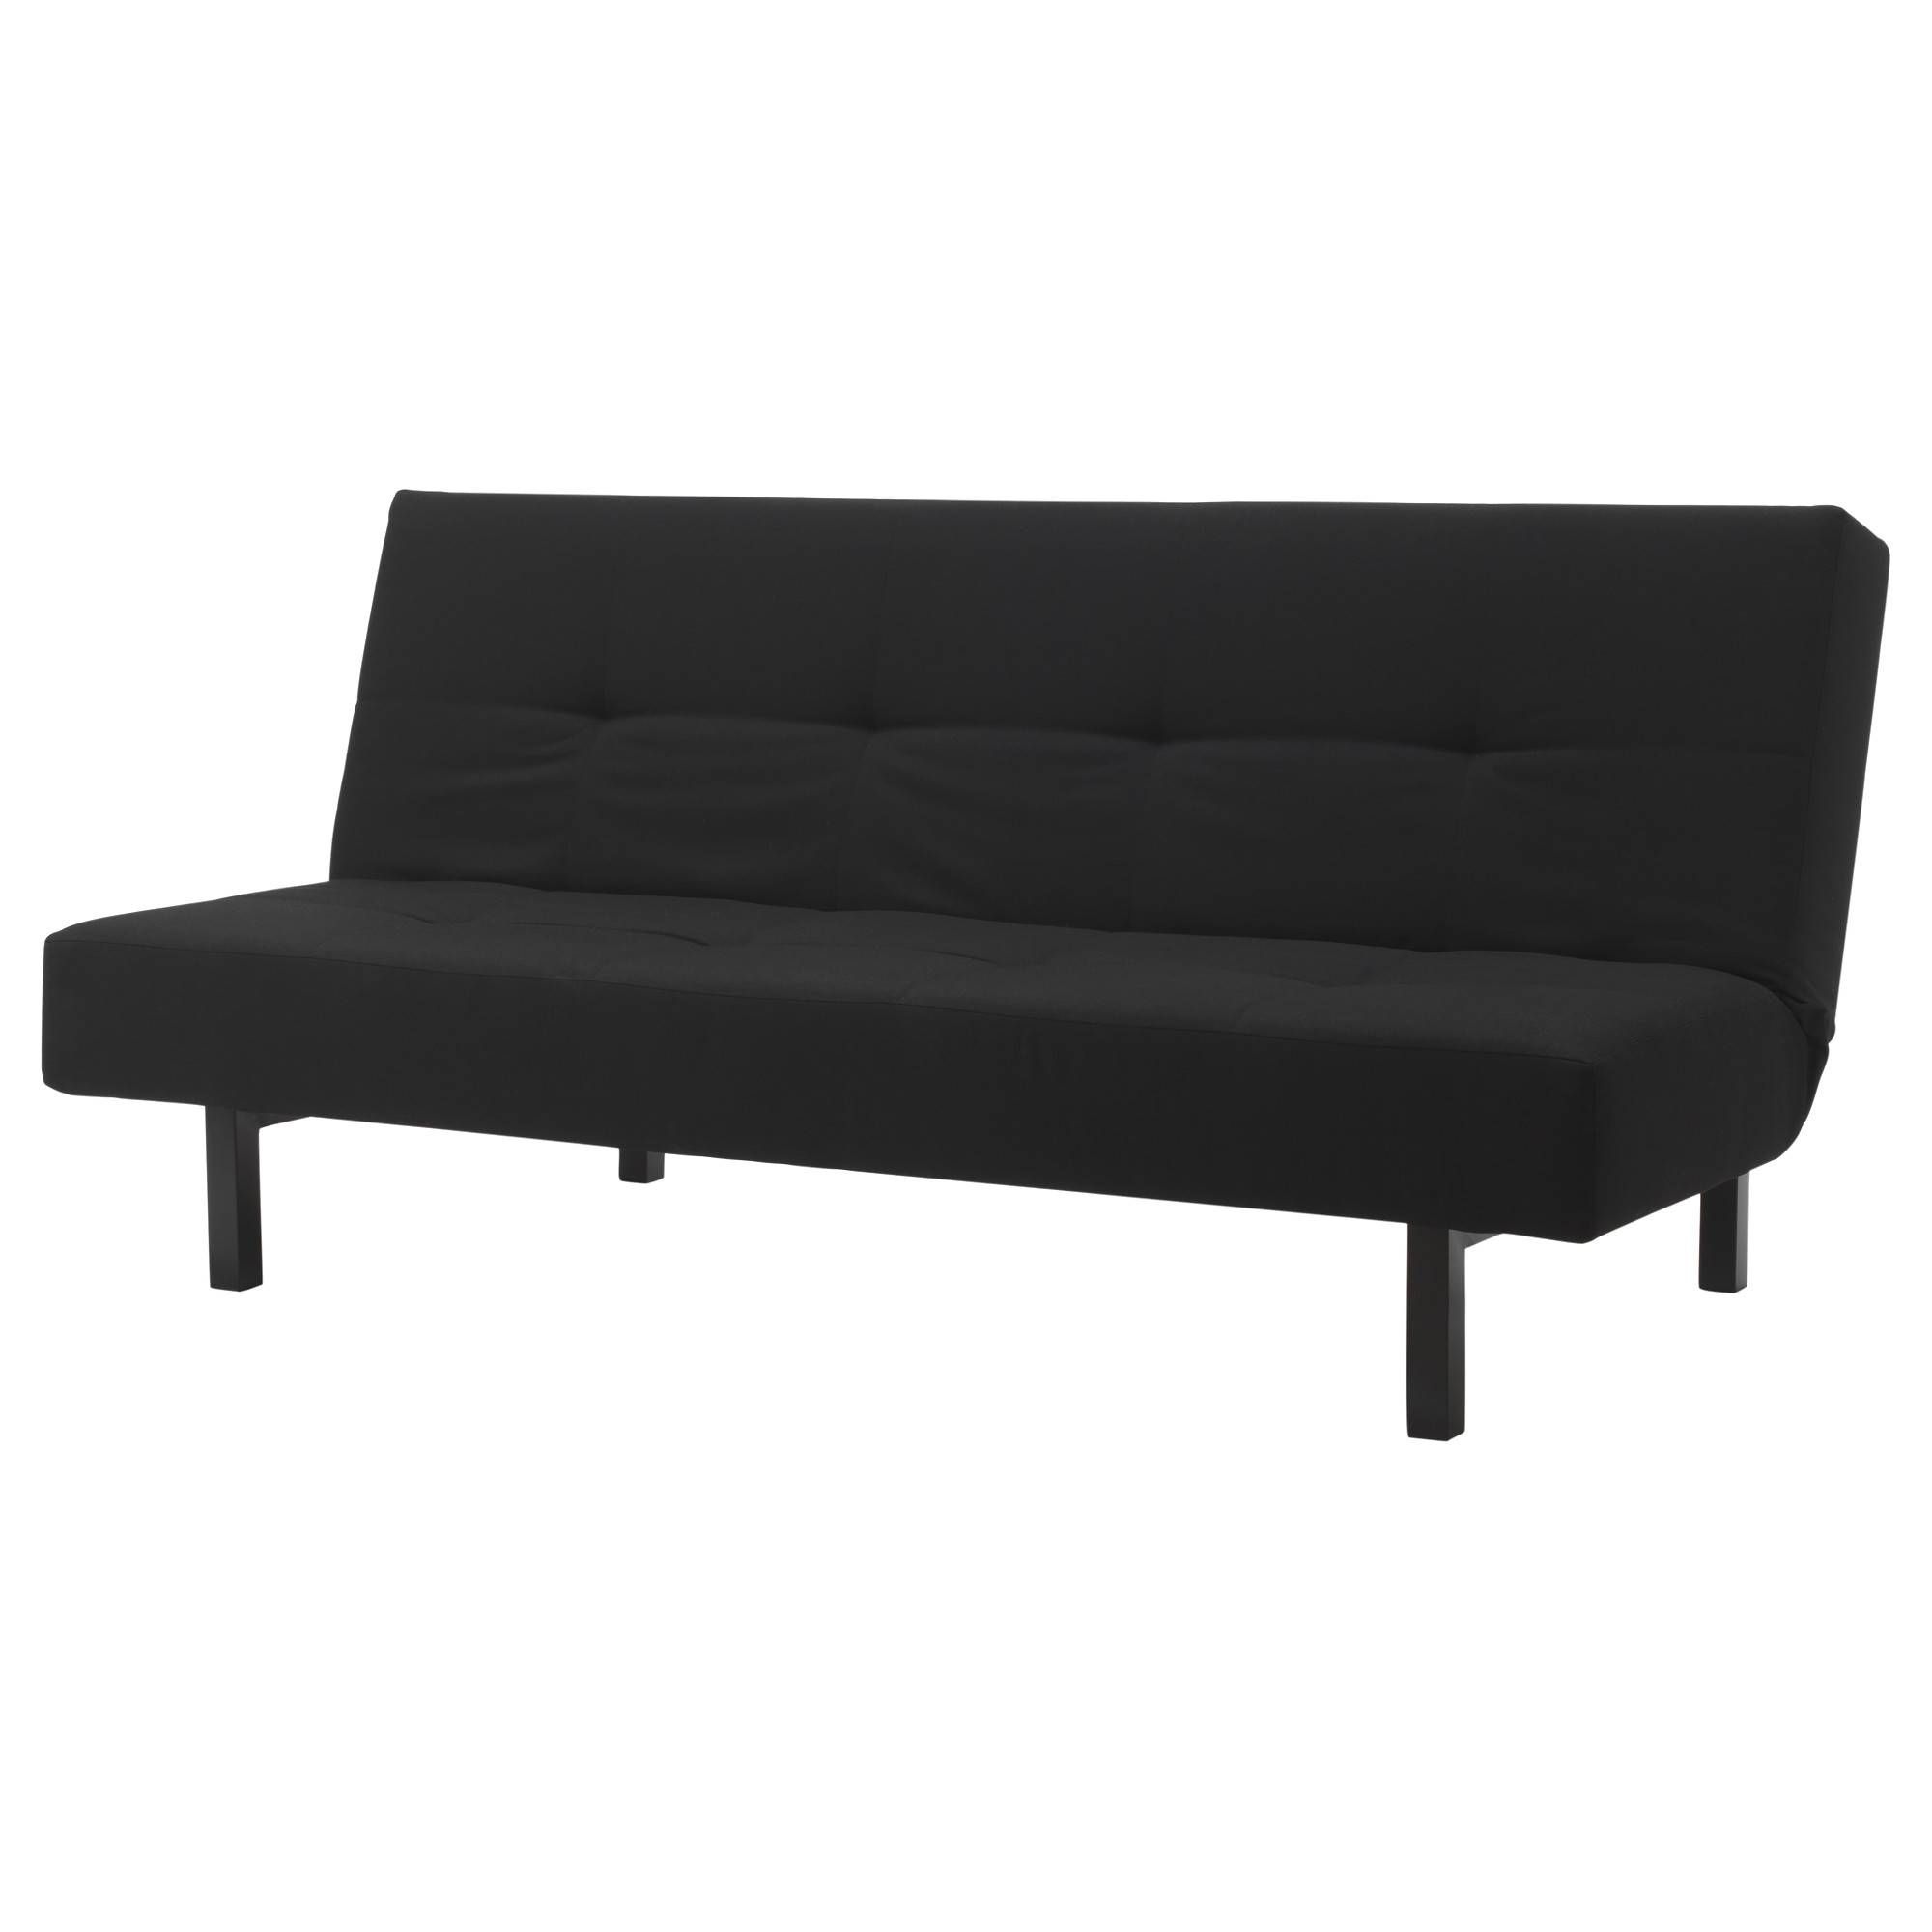 Sleeper Sofas & Chair Beds – Ikea Intended For Euro Sofa Beds (View 12 of 15)